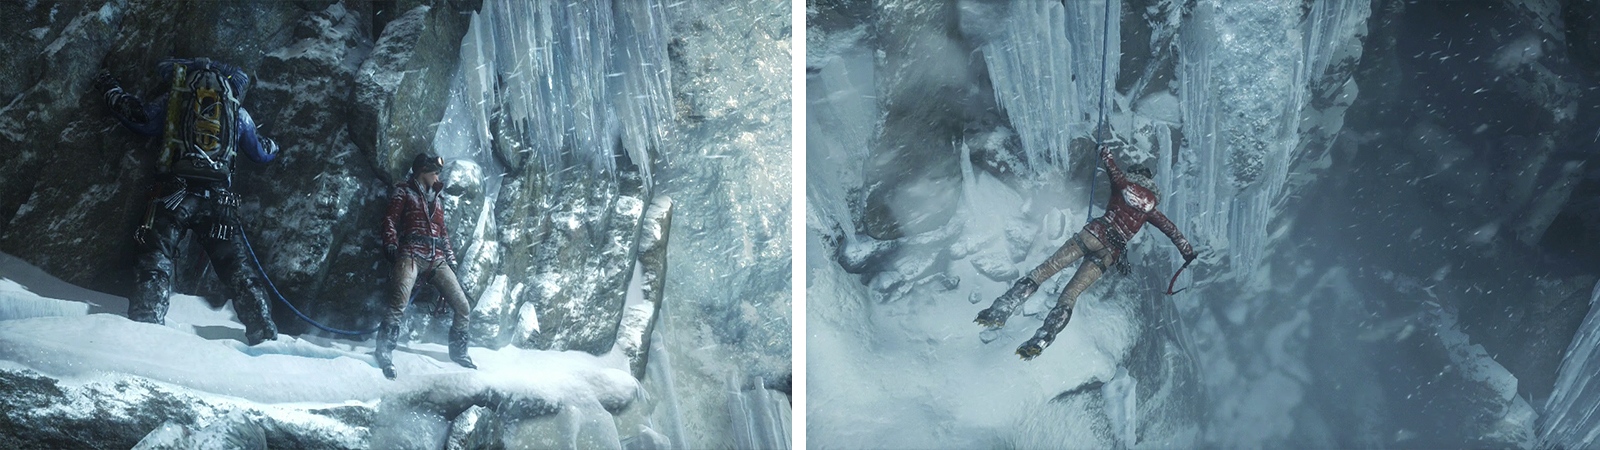 Shimmy along the narrow edge (left). Swing across to the far ice wall when you are hanging from the rope (right).